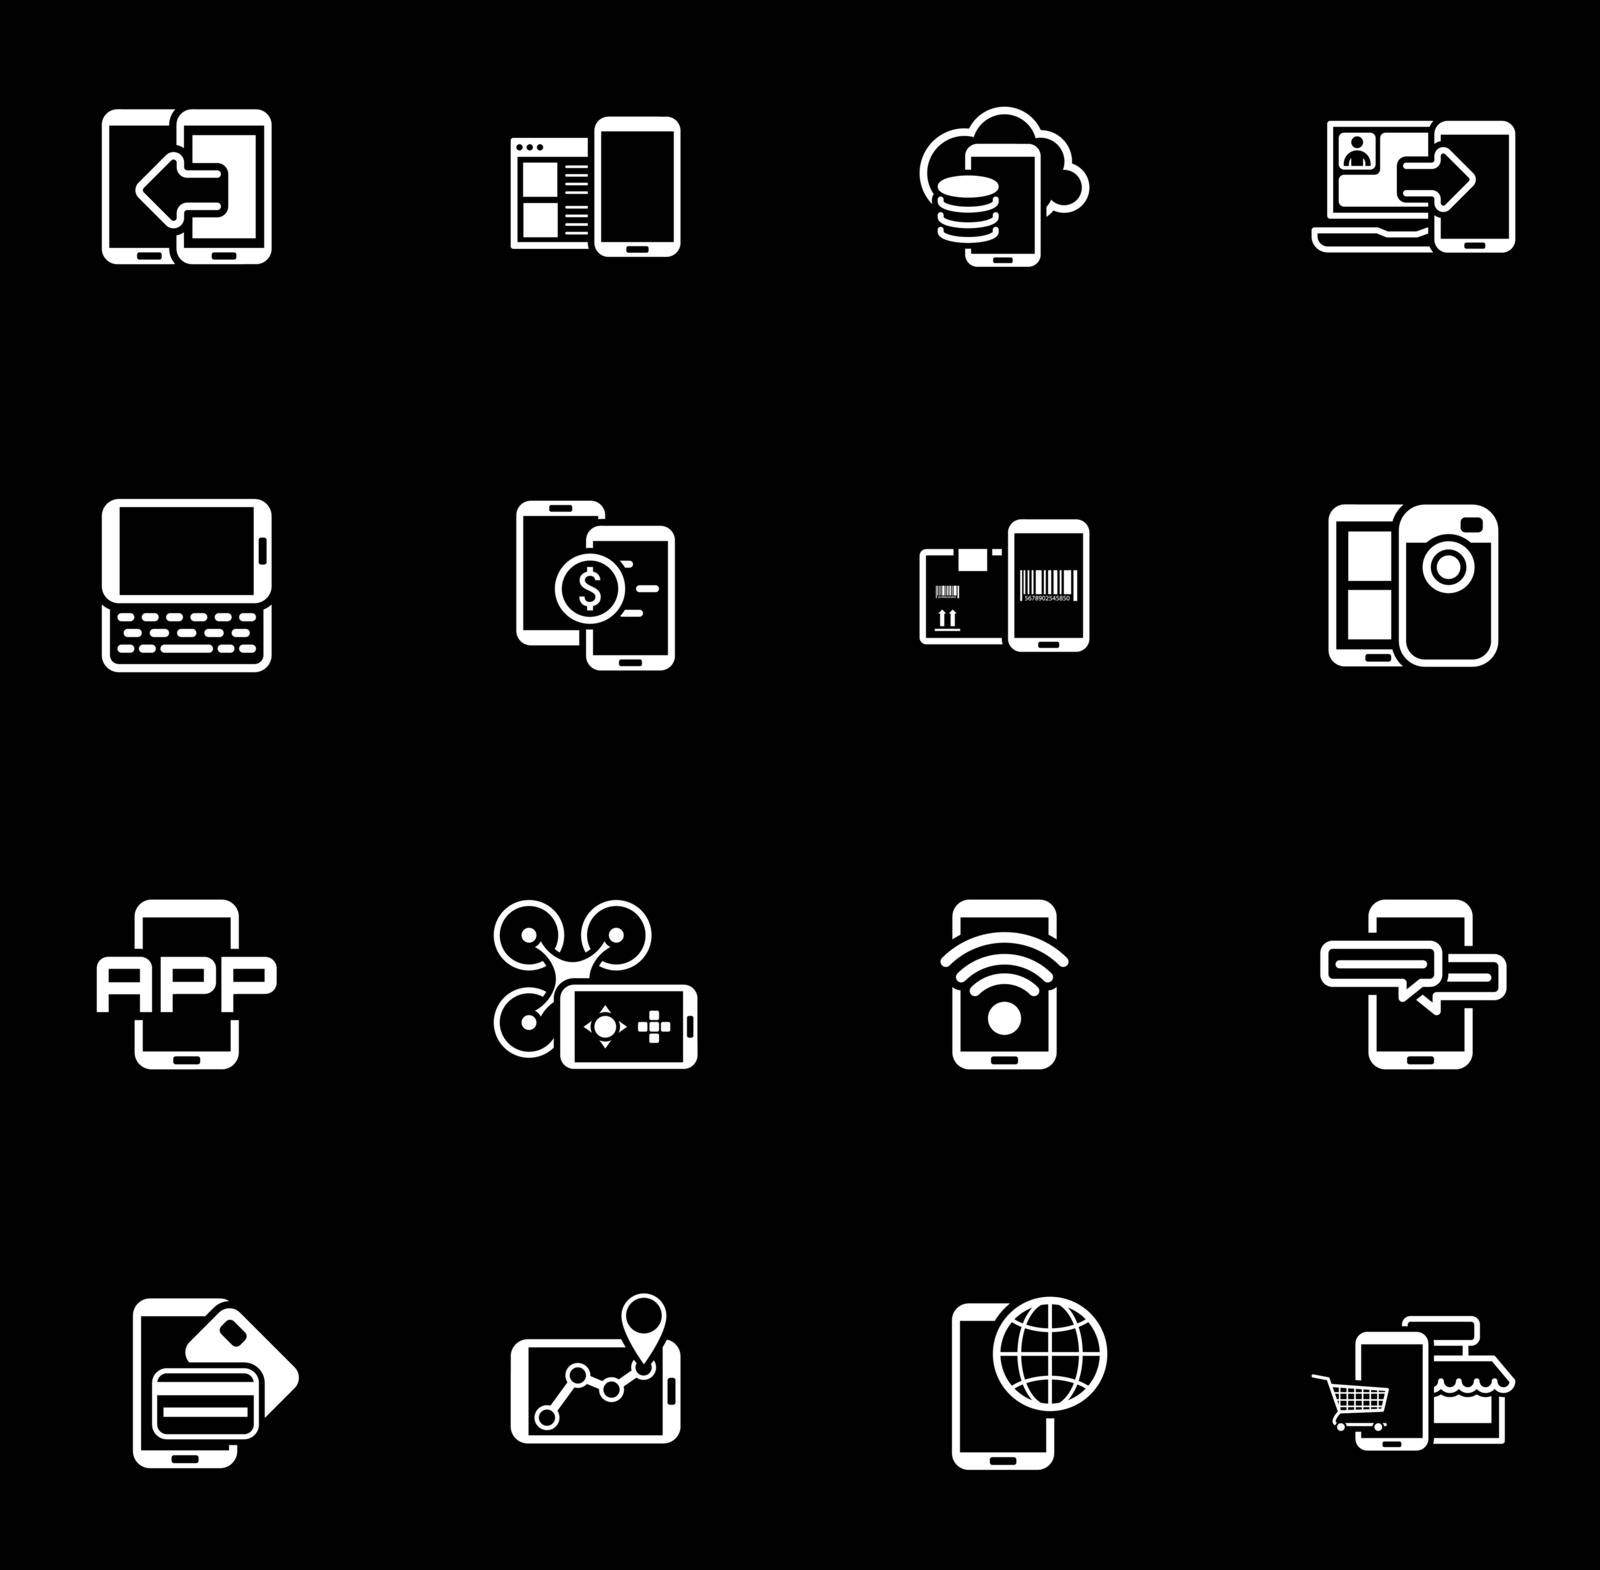 Flat Design Mobile Devices and Services Icons Set. by WaD